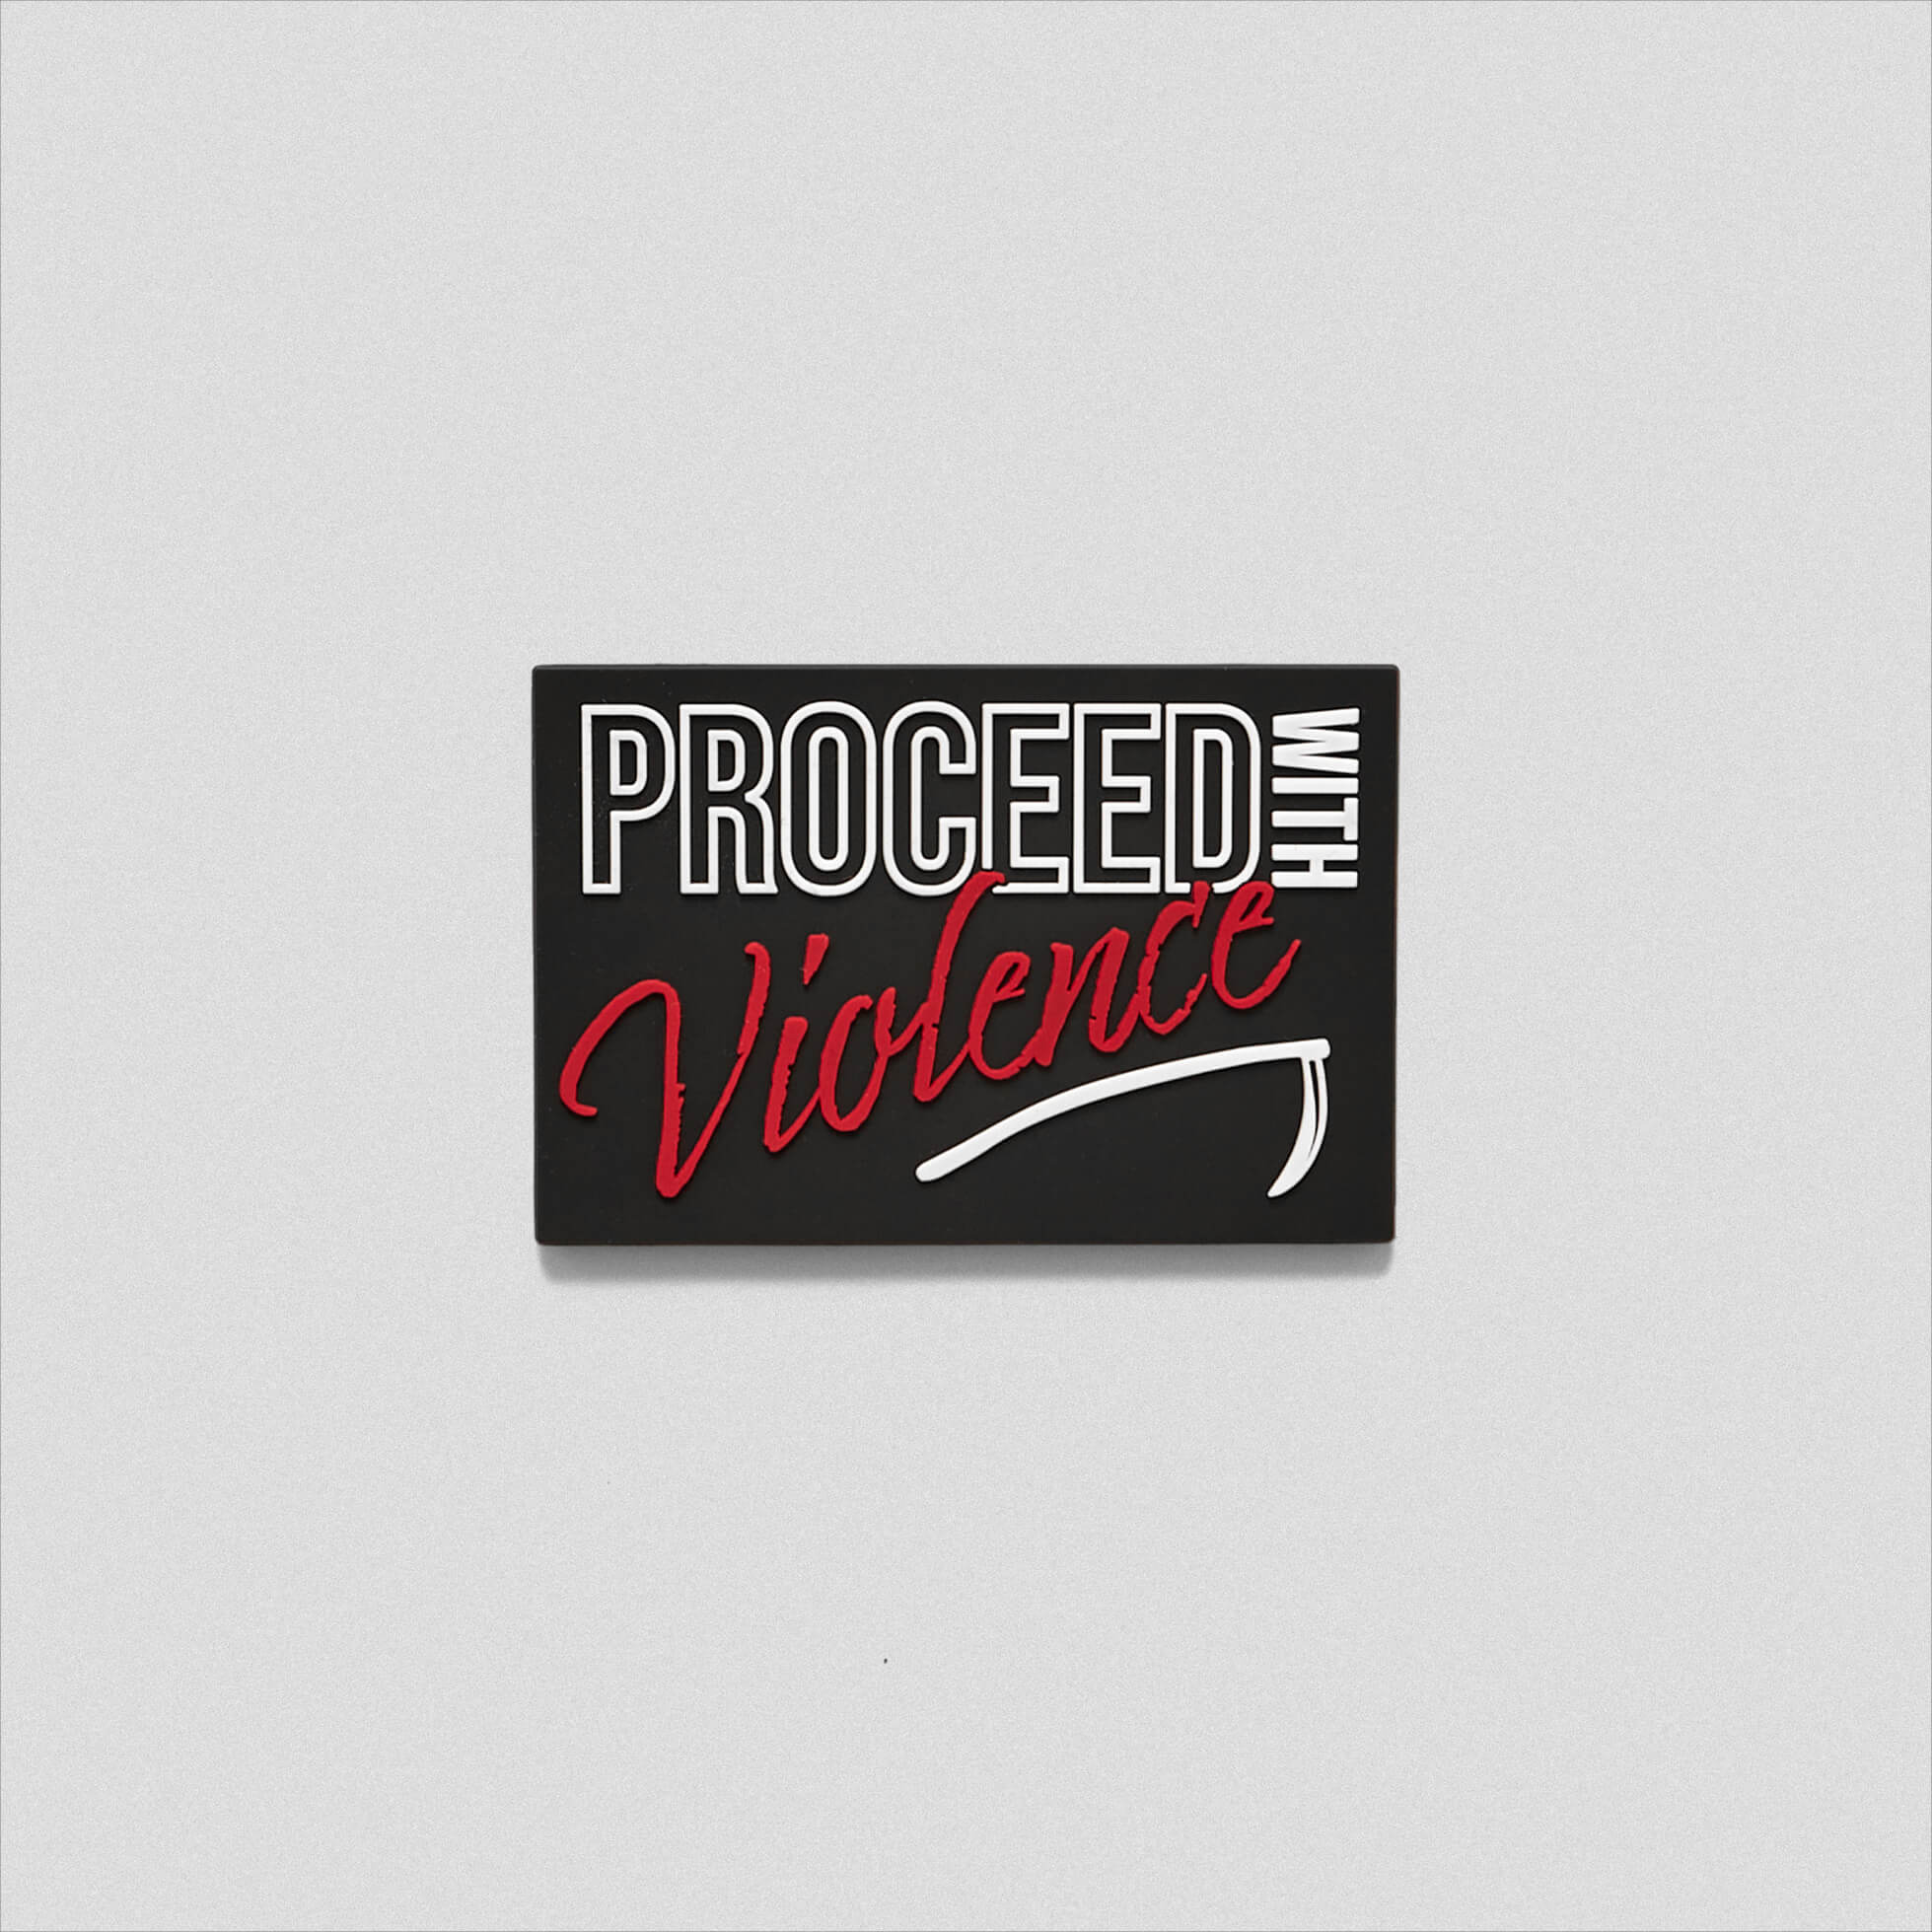 A black and white patch with red text that says Proceed With Violence across the middle and has a scythe at the bottom.